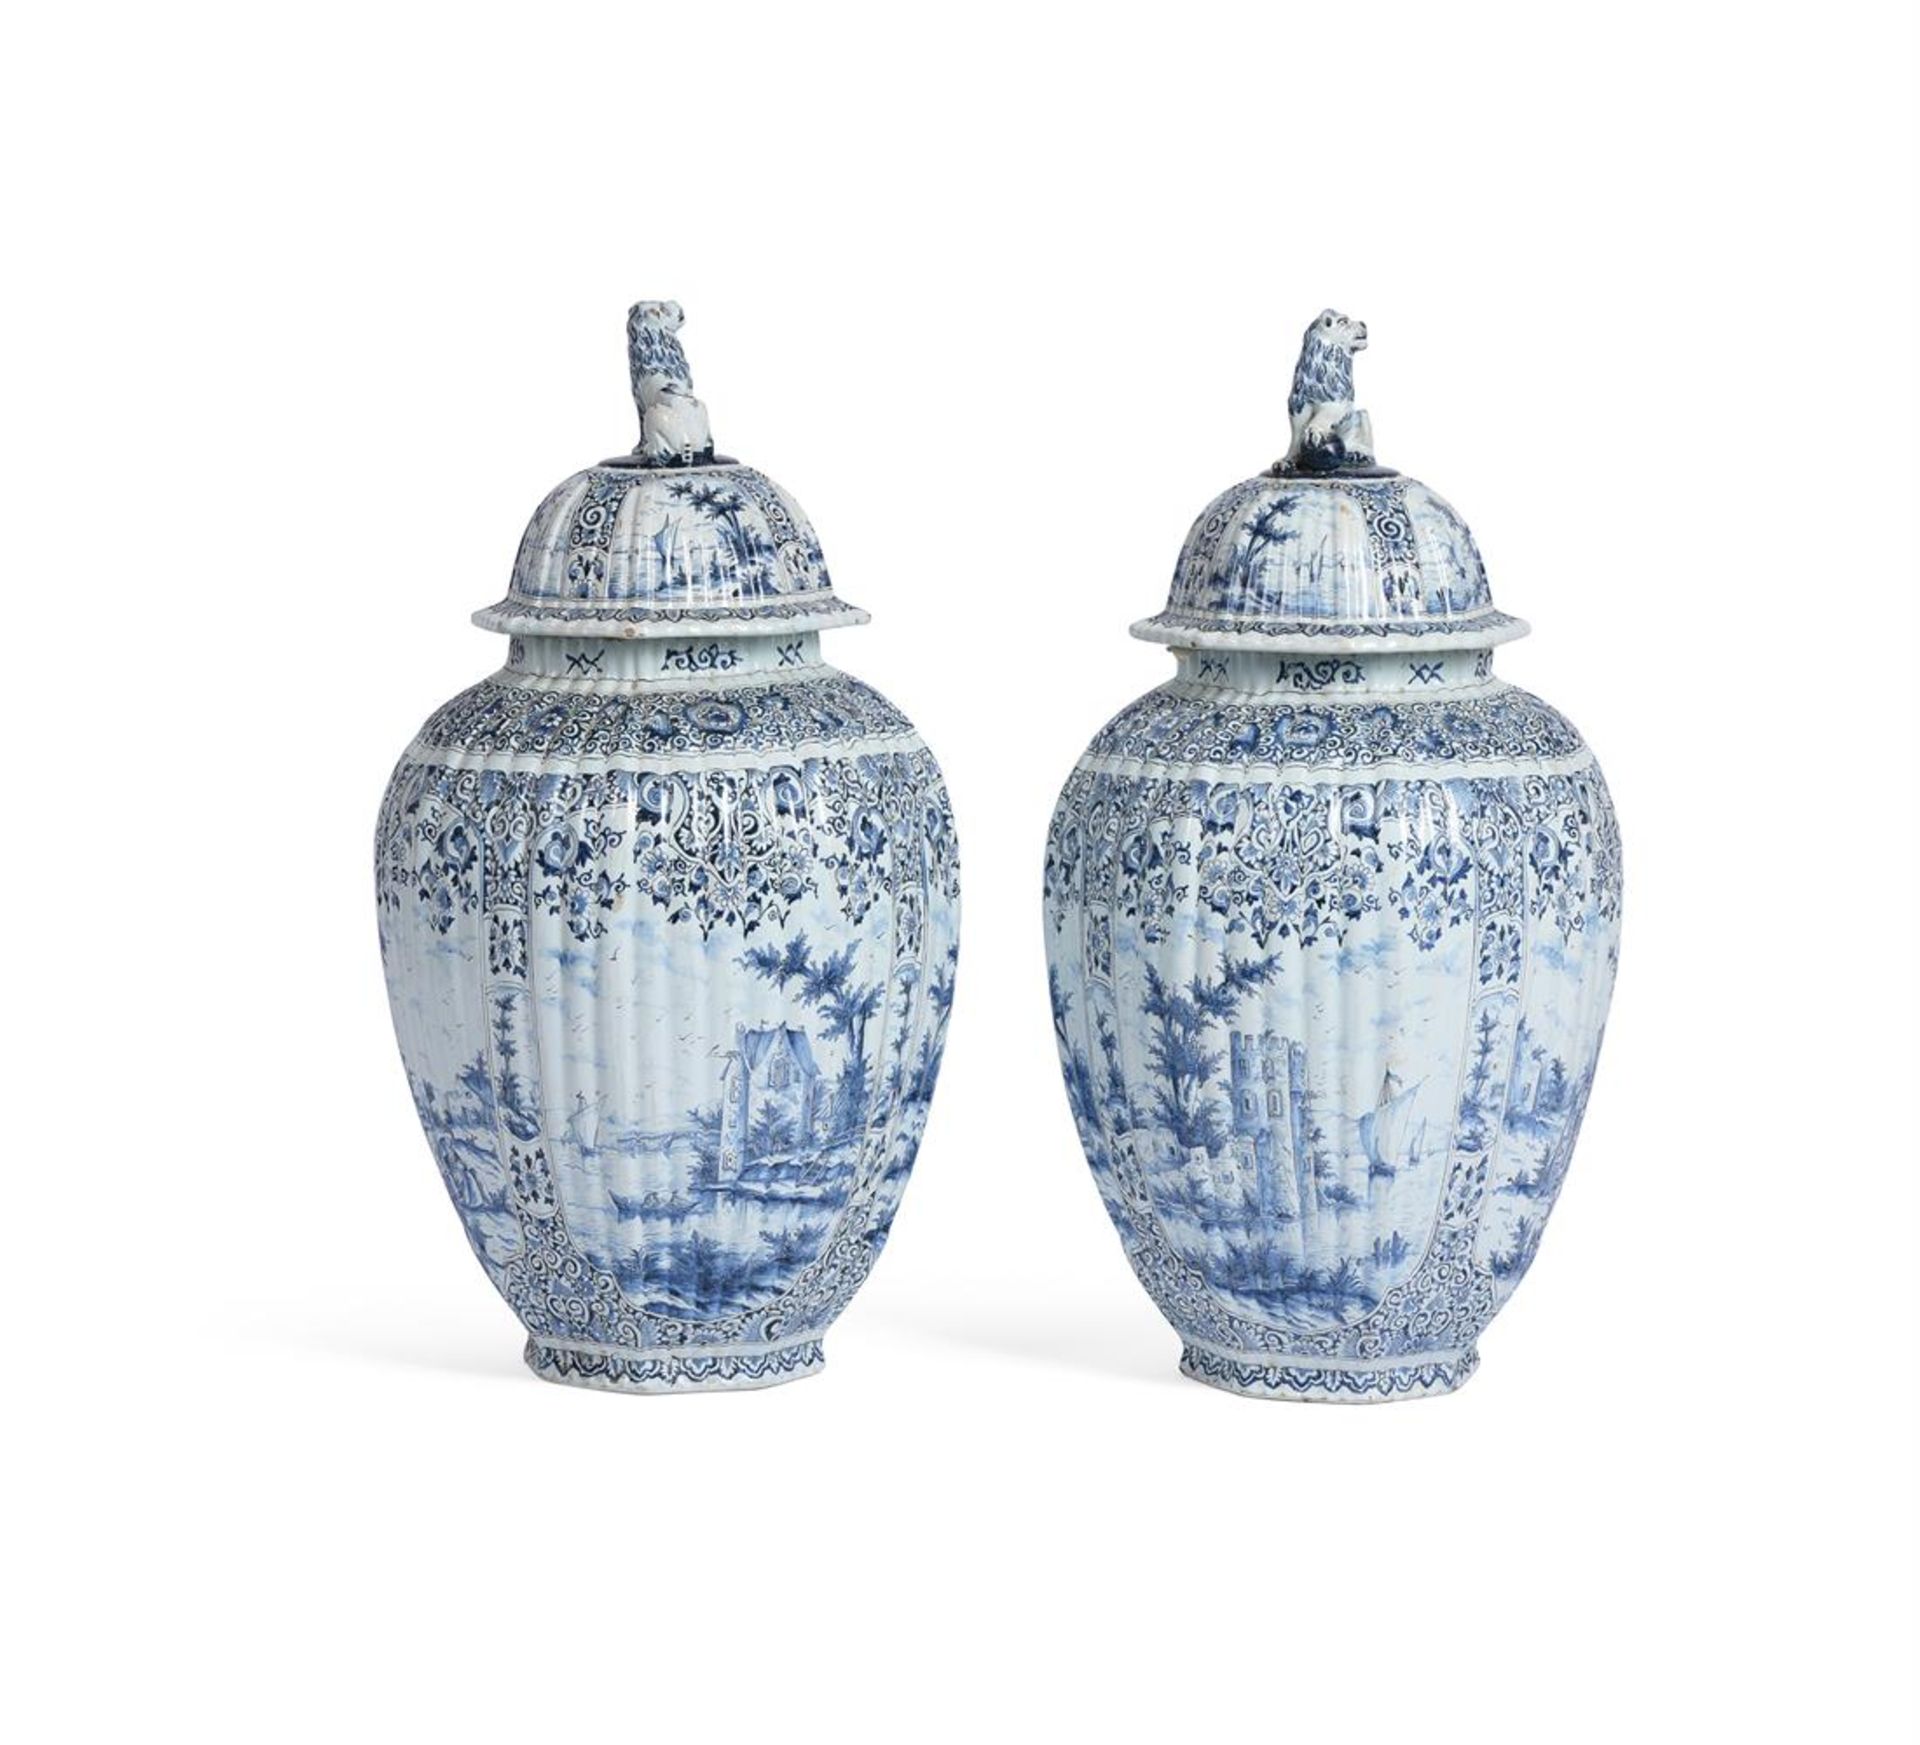 A LARGE PAIR OF DELFT JARS AND COVERS, 19TH CENTURY - Image 3 of 6